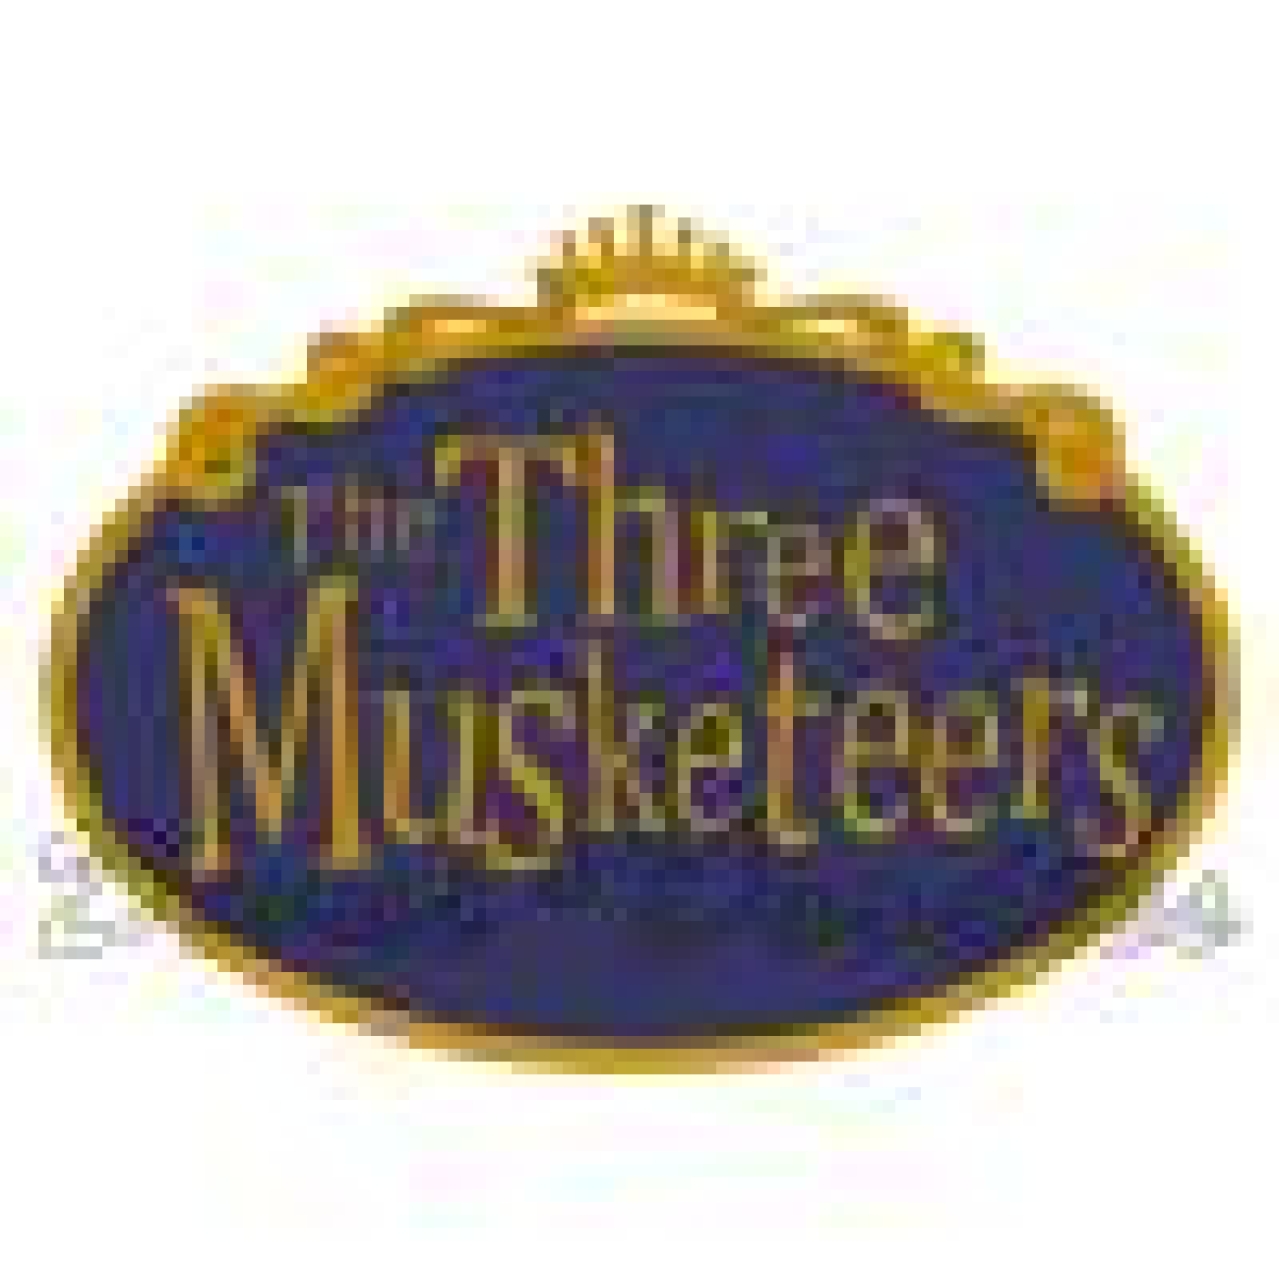 the three musketeers logo 14667